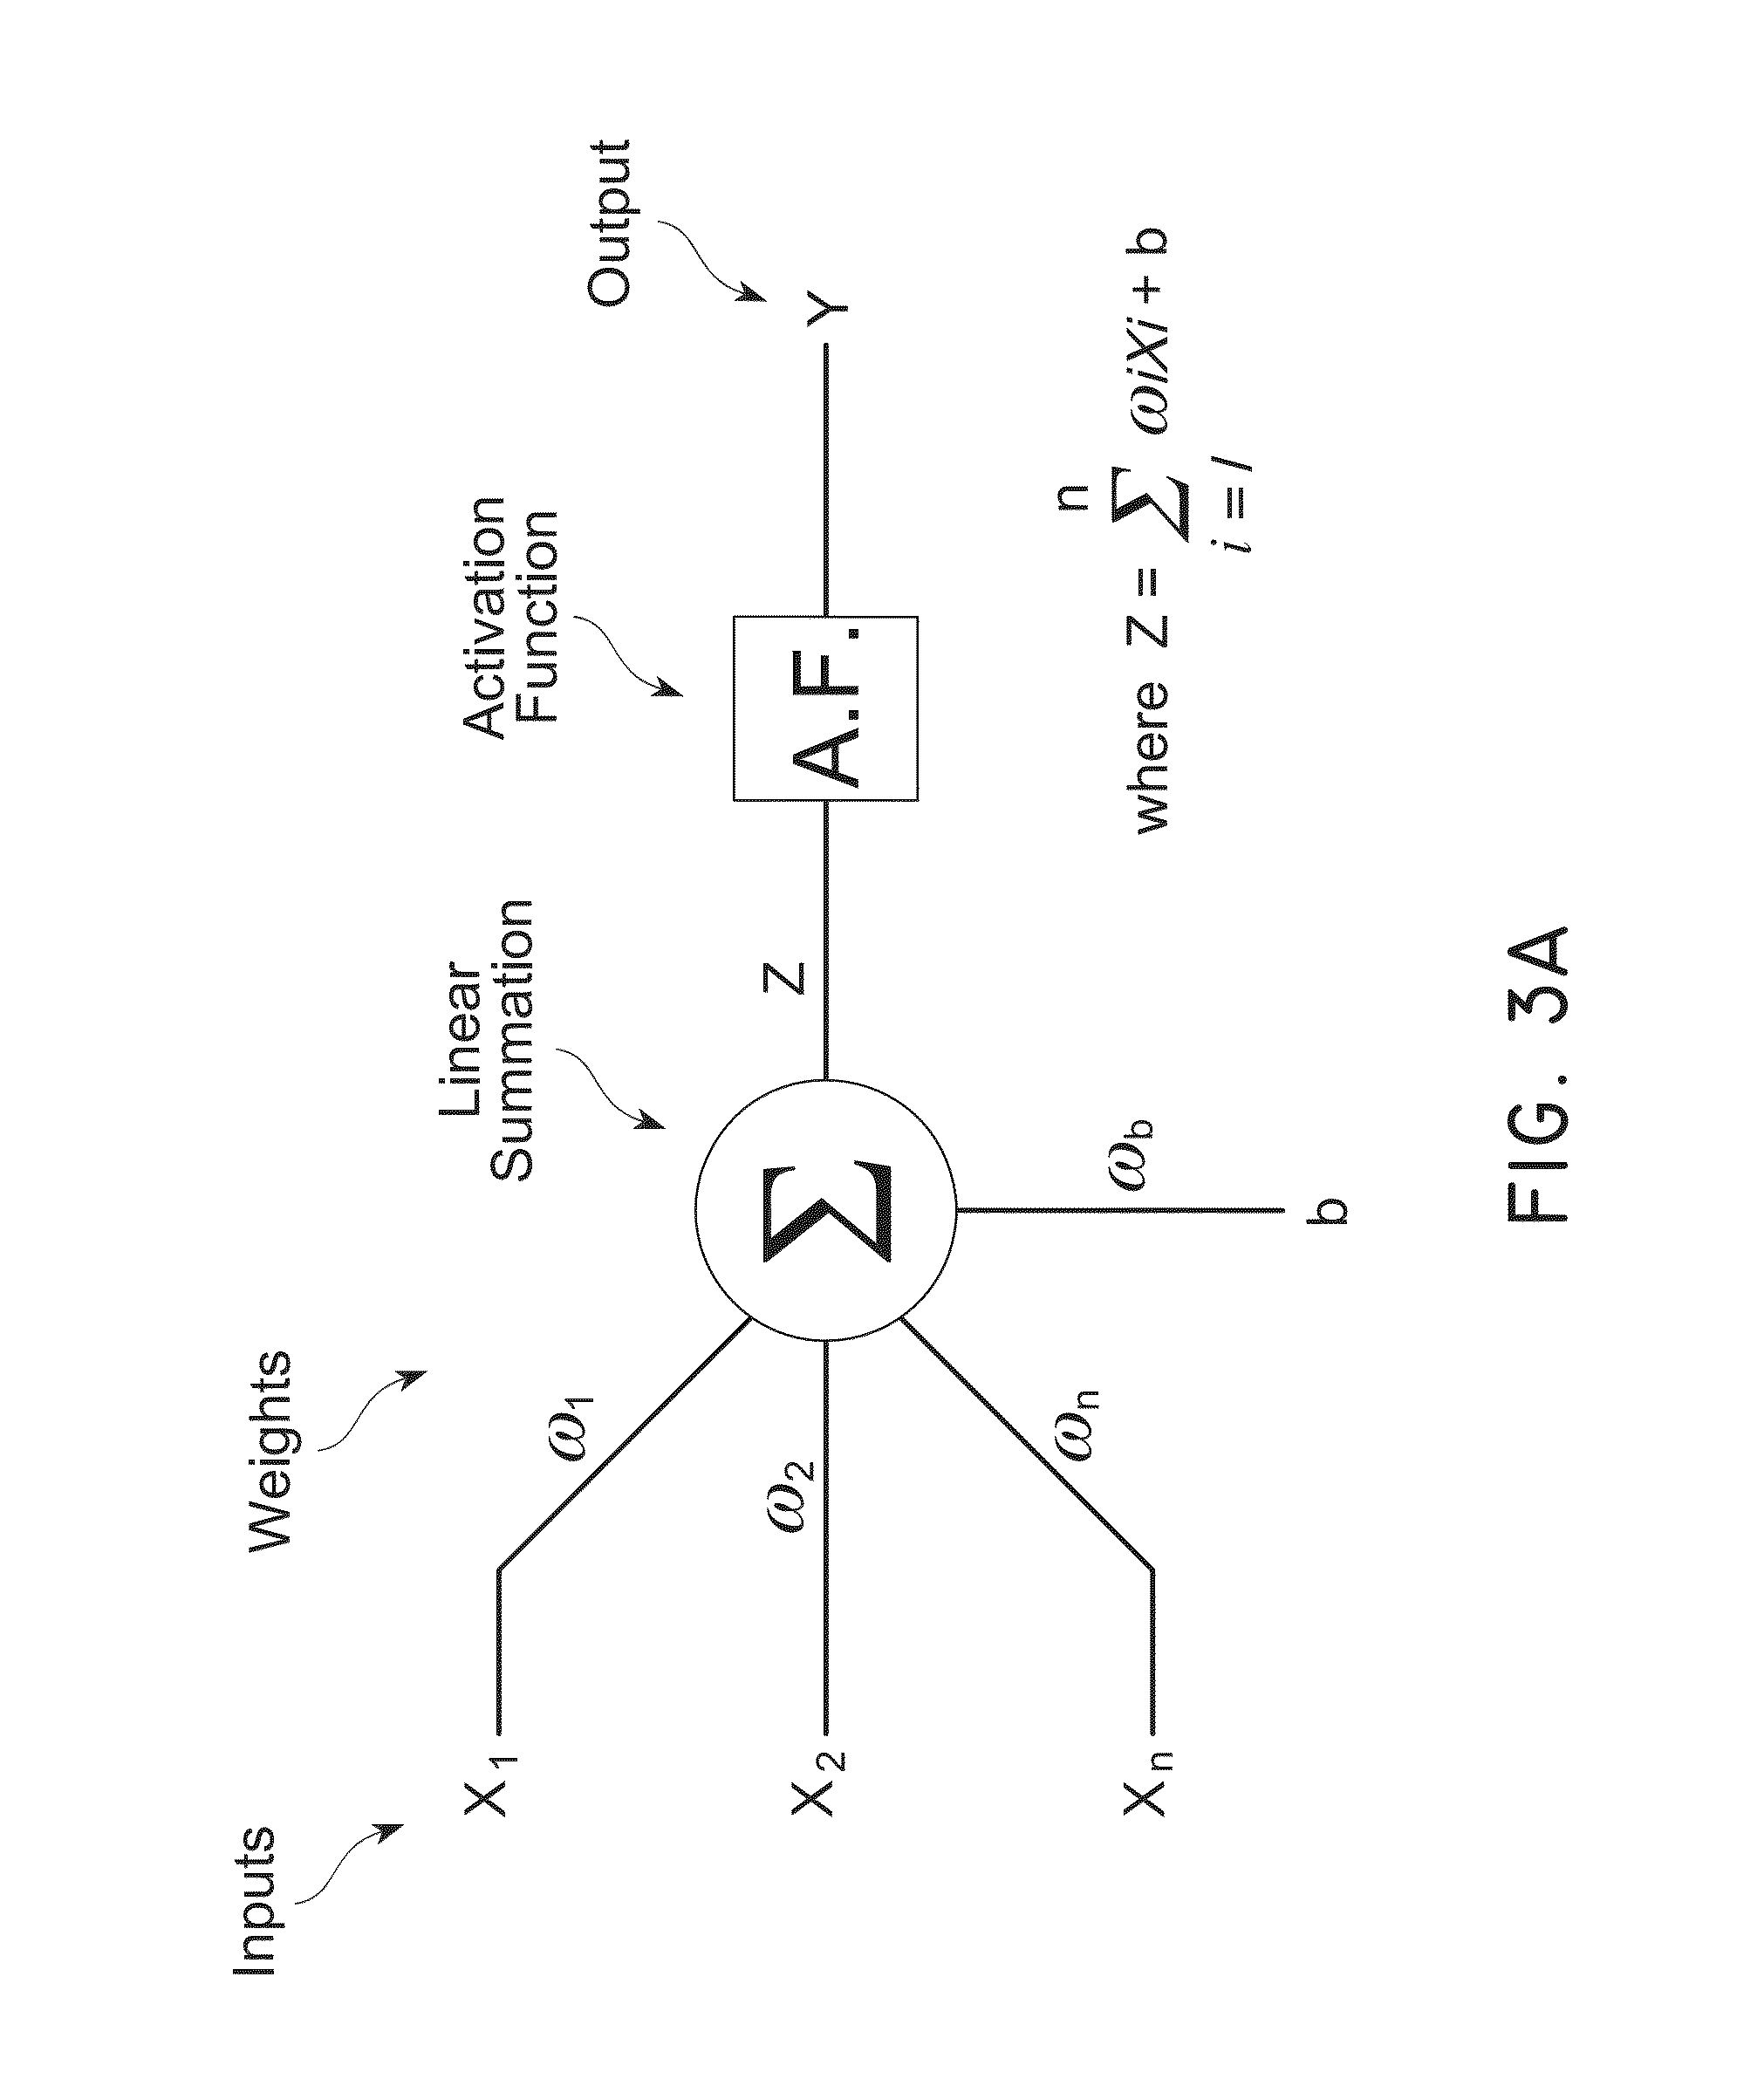 Neural network frequency control and compensation of control voltage linearity